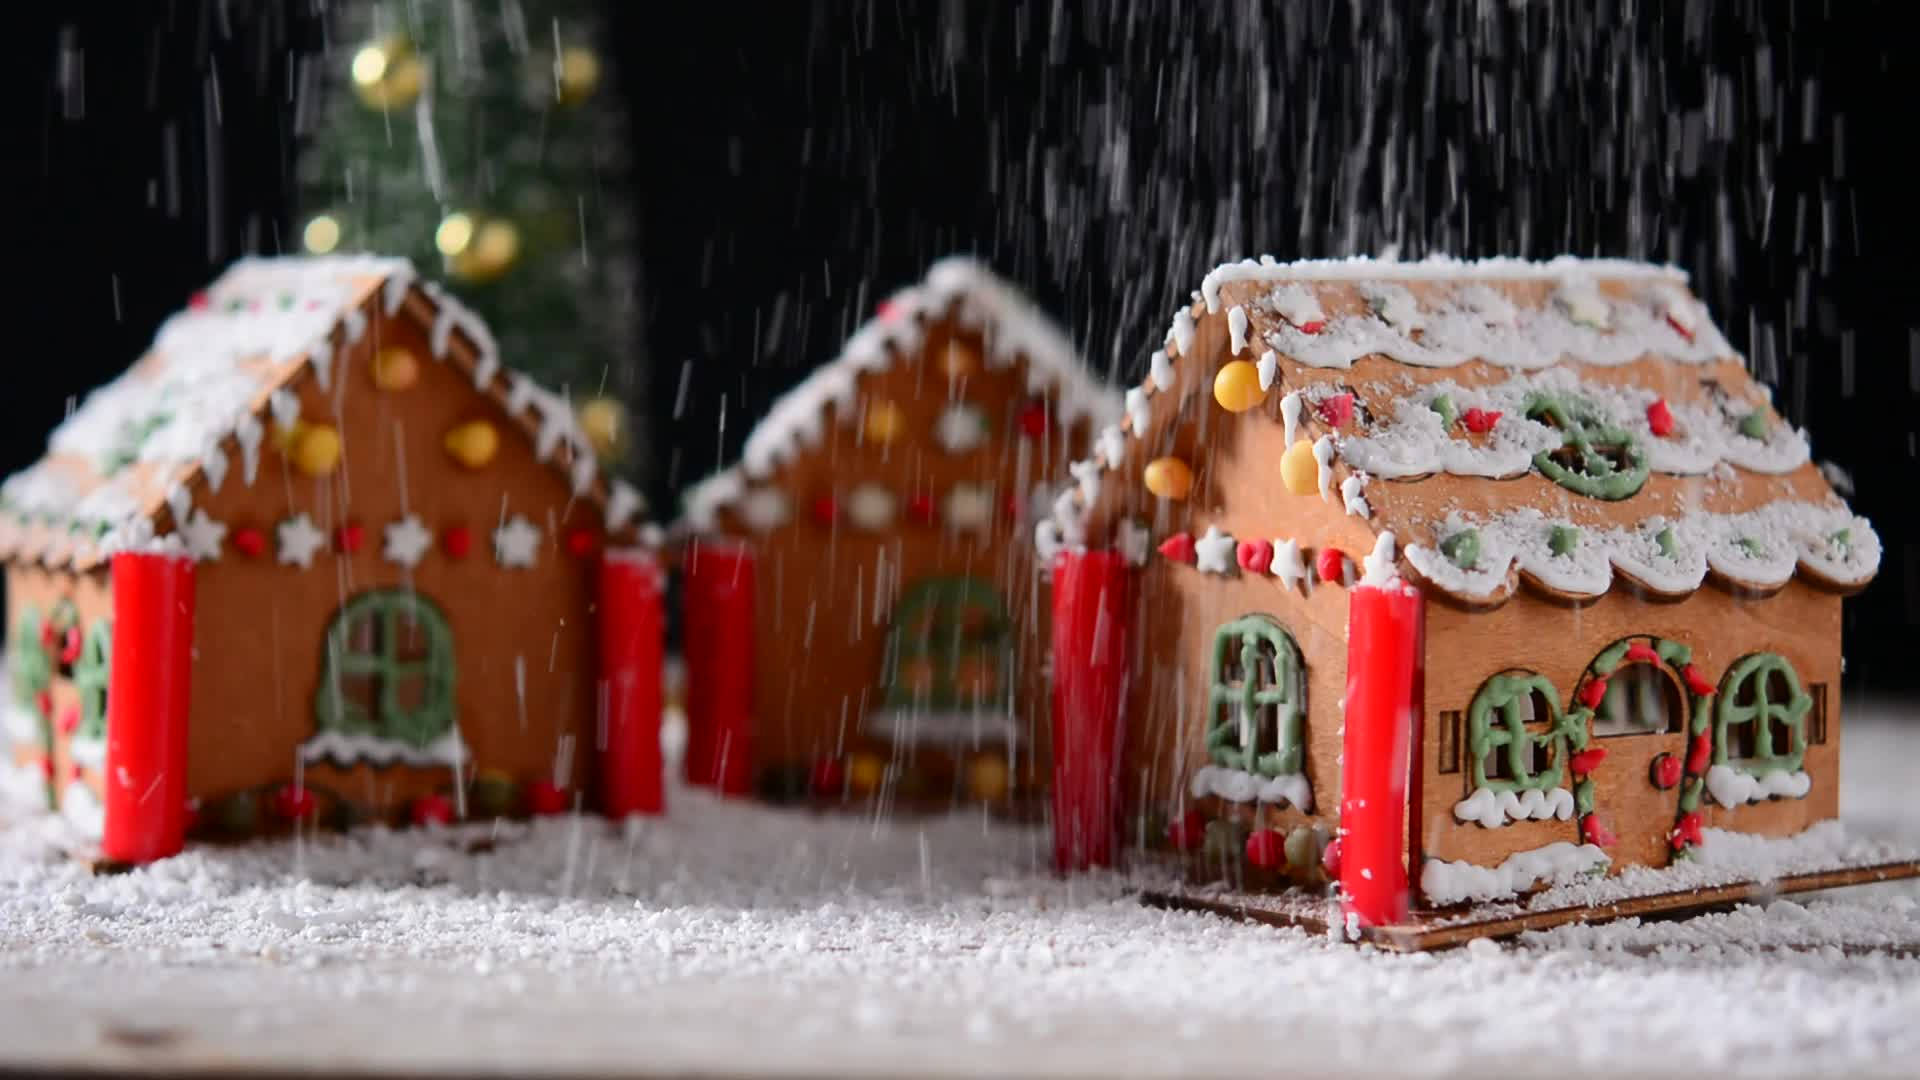 "Enchanting Snowy Gingerbread House Nestled in a Christmas Fantasy." Wallpaper